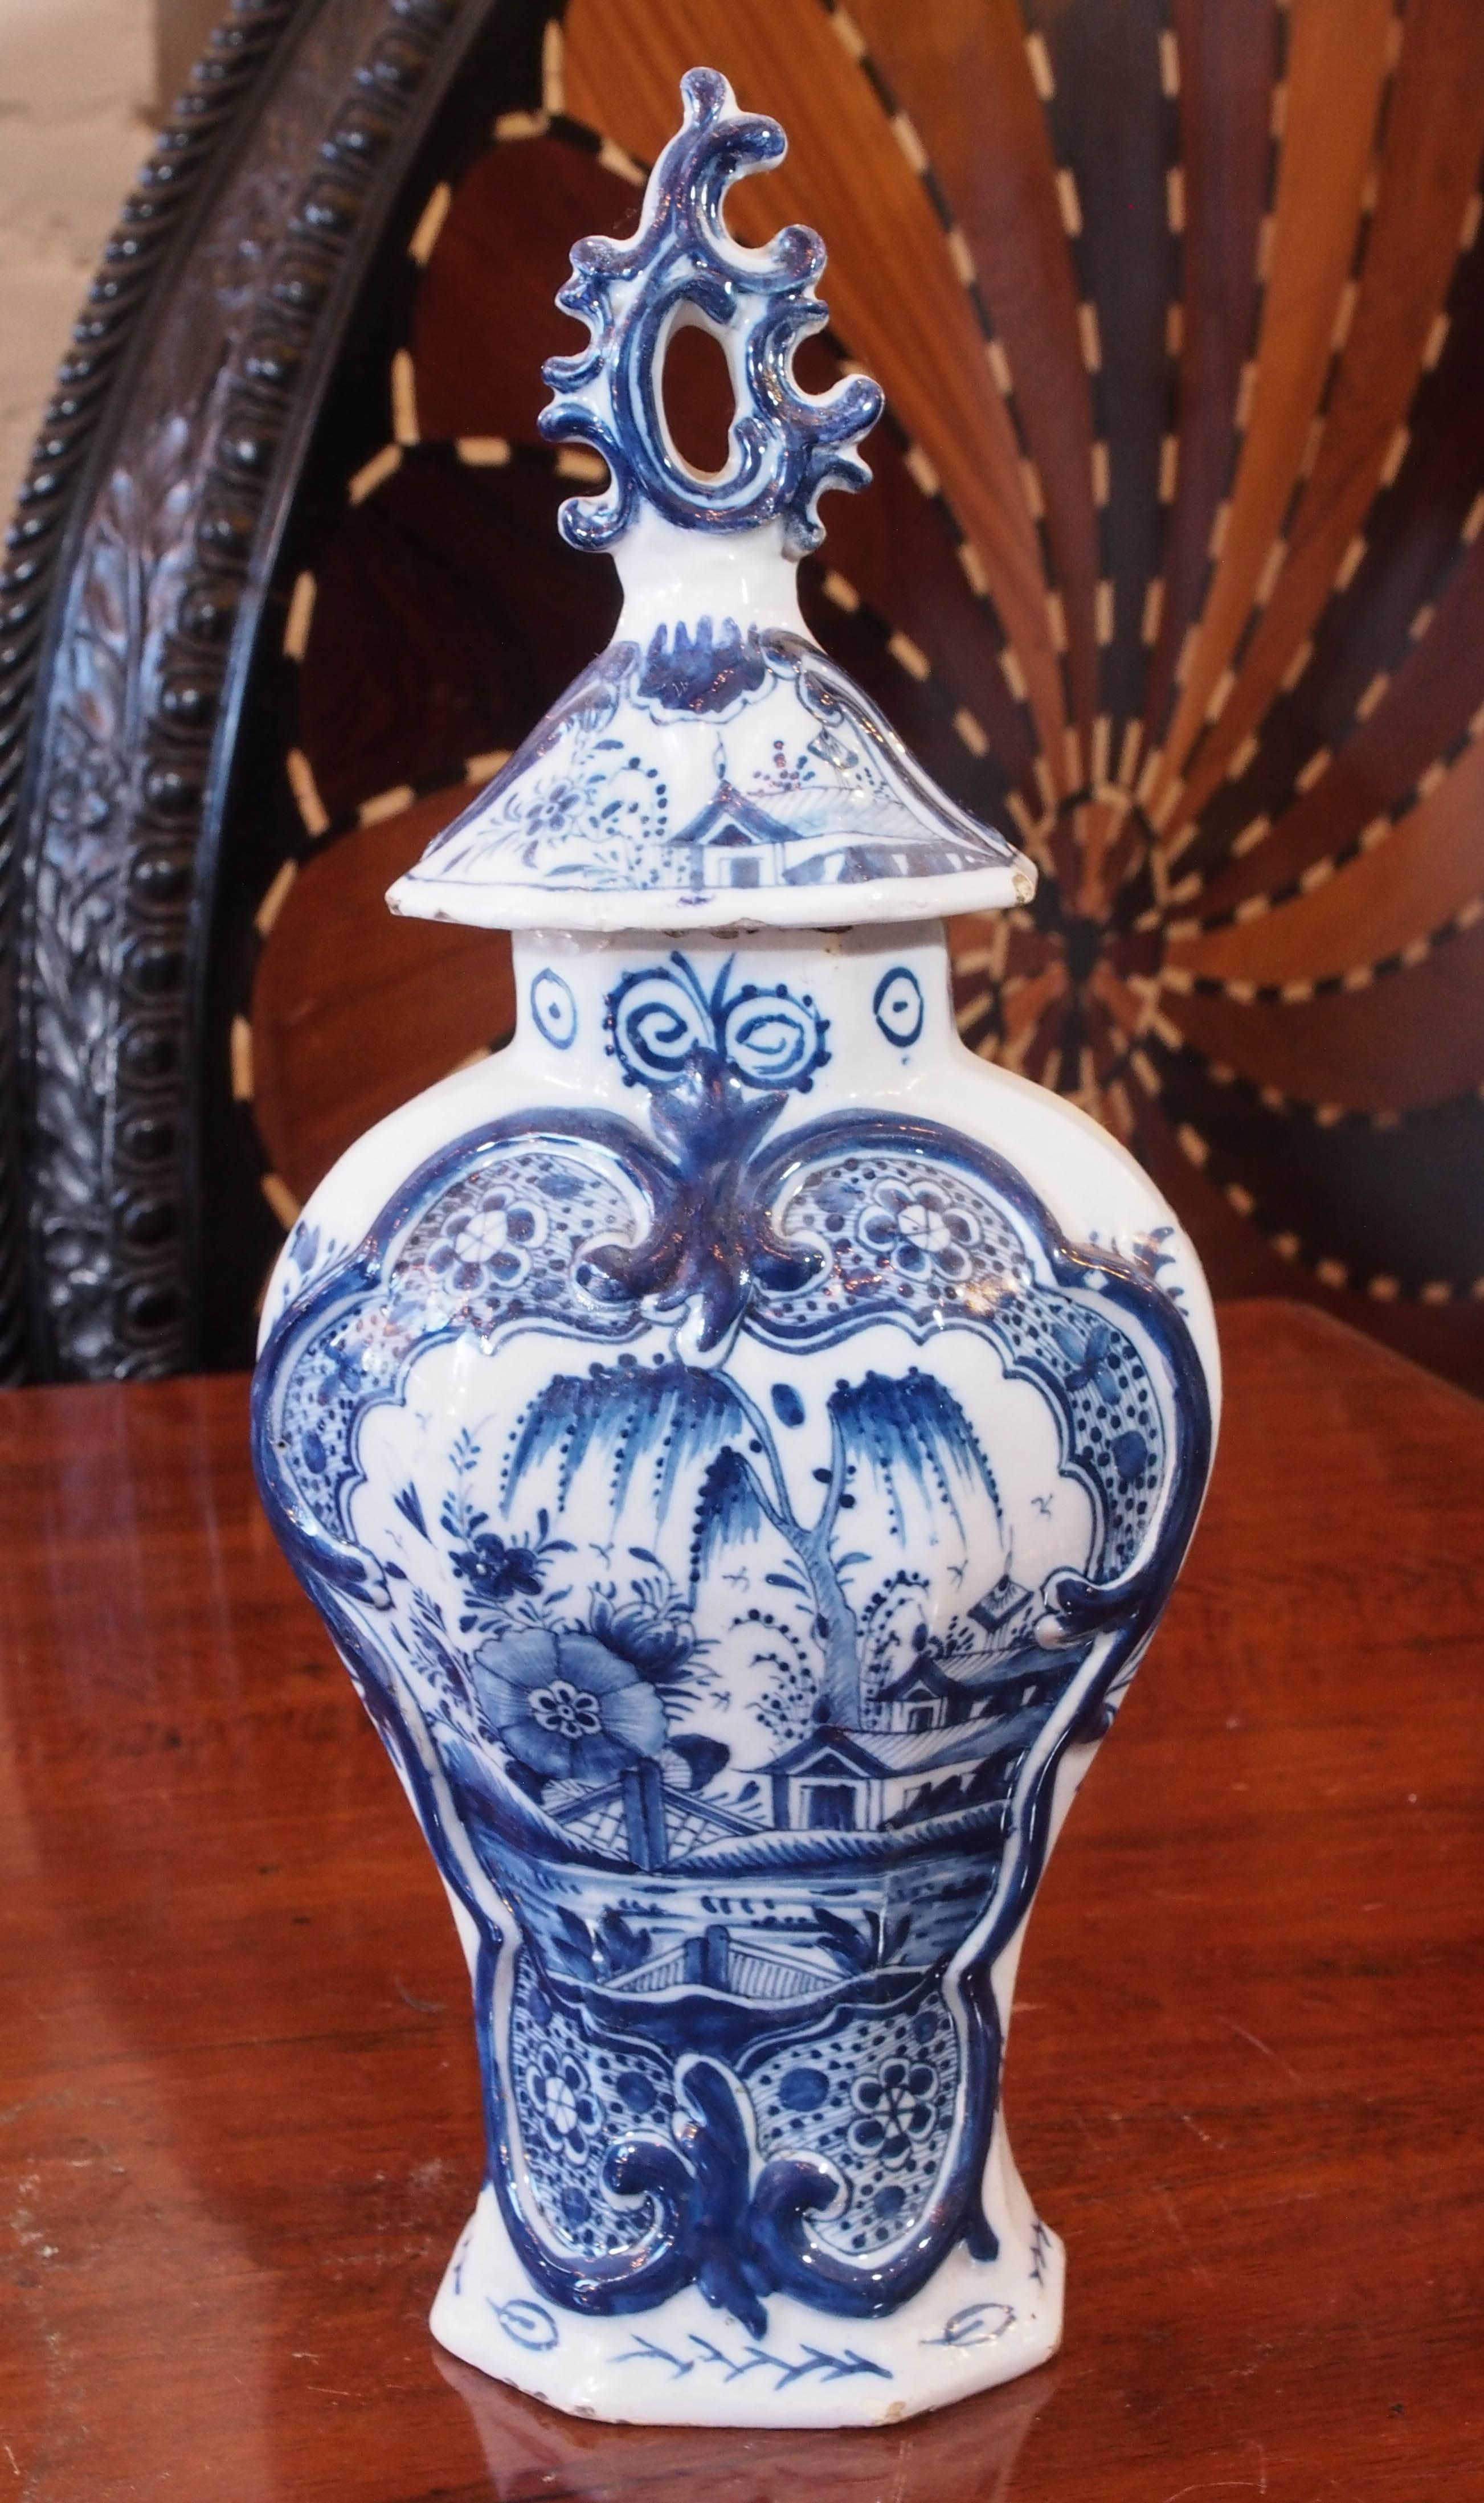 Pair of delft blue and white lidded garniture vases with Baroque finials and chinoiserie scenes.